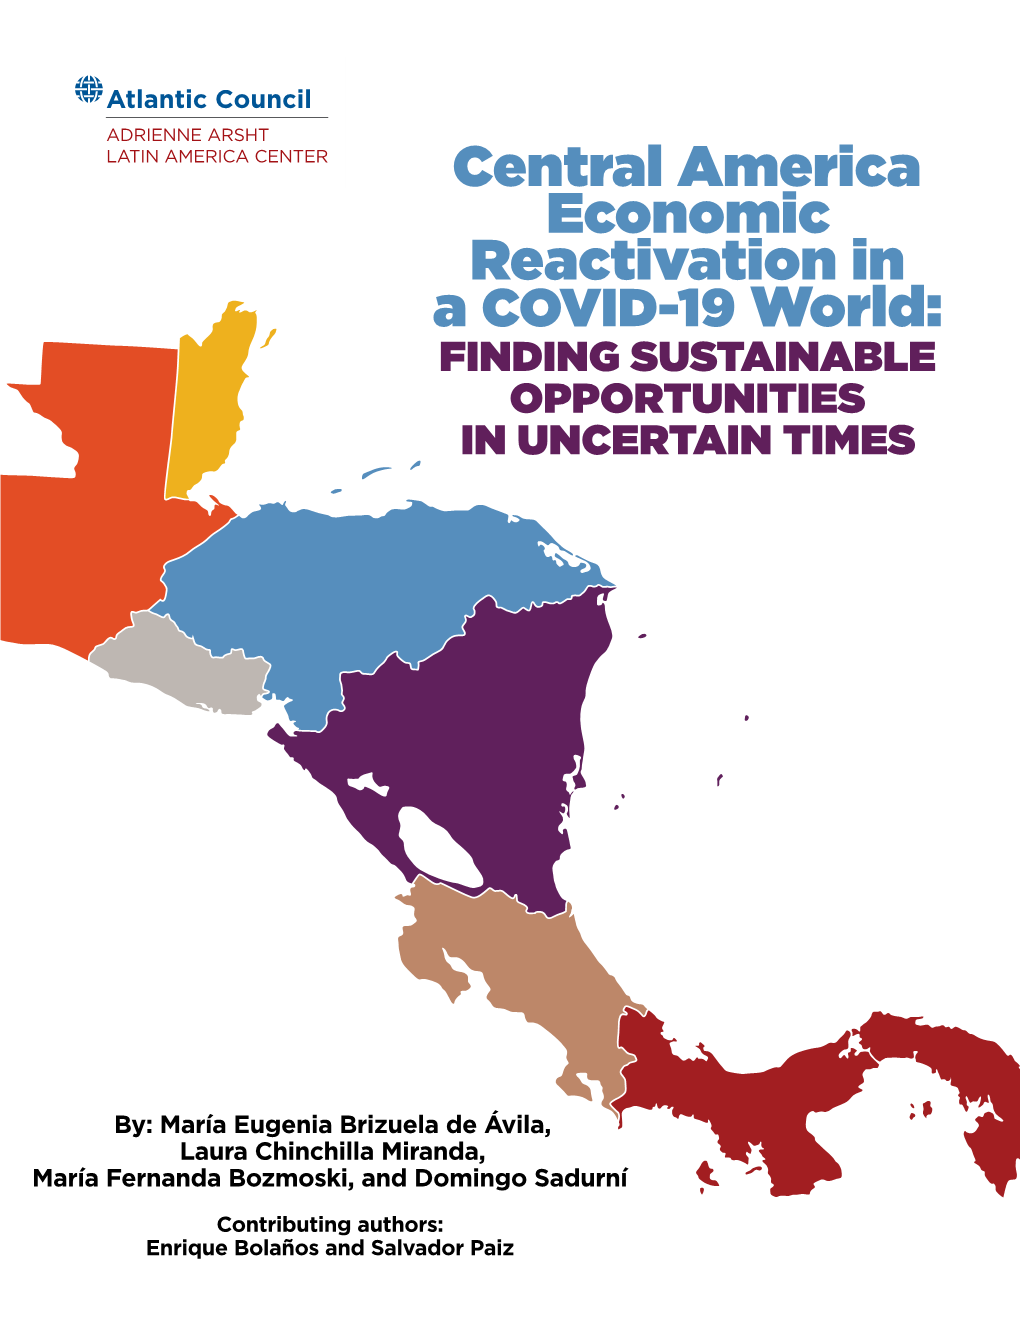 Central America Economic Reactivation in a COVID-19 World: FINDING SUSTAINABLE OPPORTUNITIES in UNCERTAIN TIMES